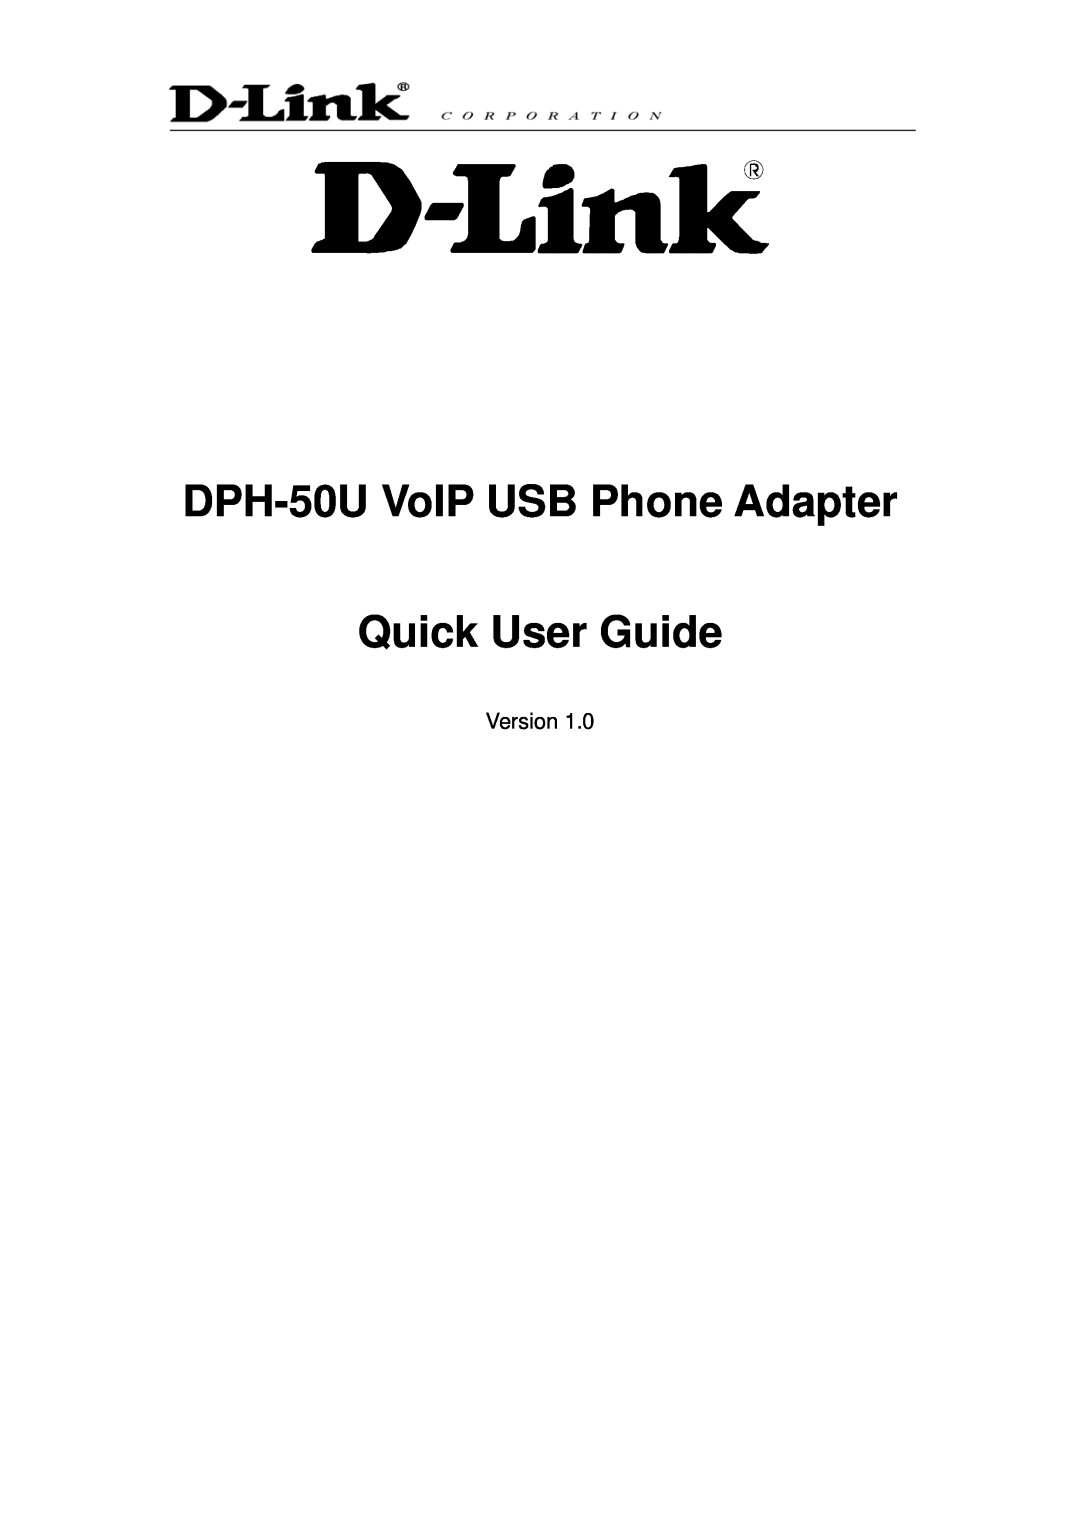 D-Link manual Version, DPH-50U VoIP USB Phone Adapter, Quick User Guide 